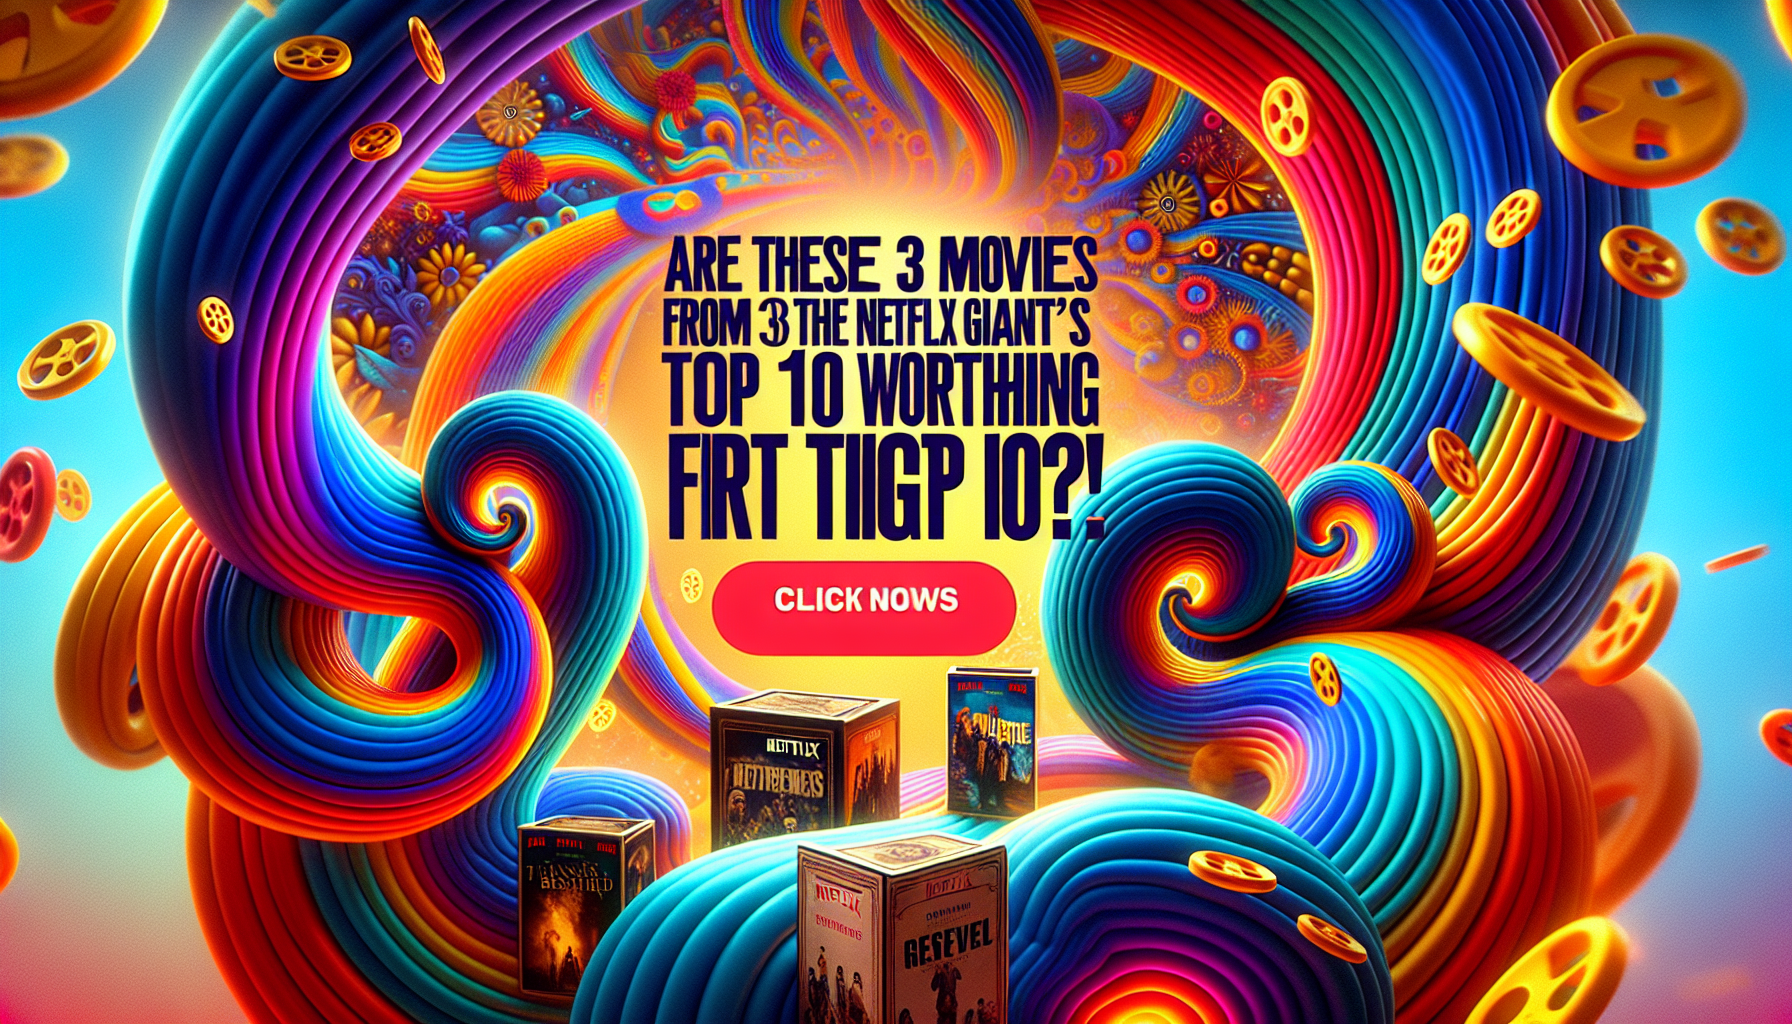 discover if the 3 movies from netflix's top 10 are worth watching right now. click to find out more!